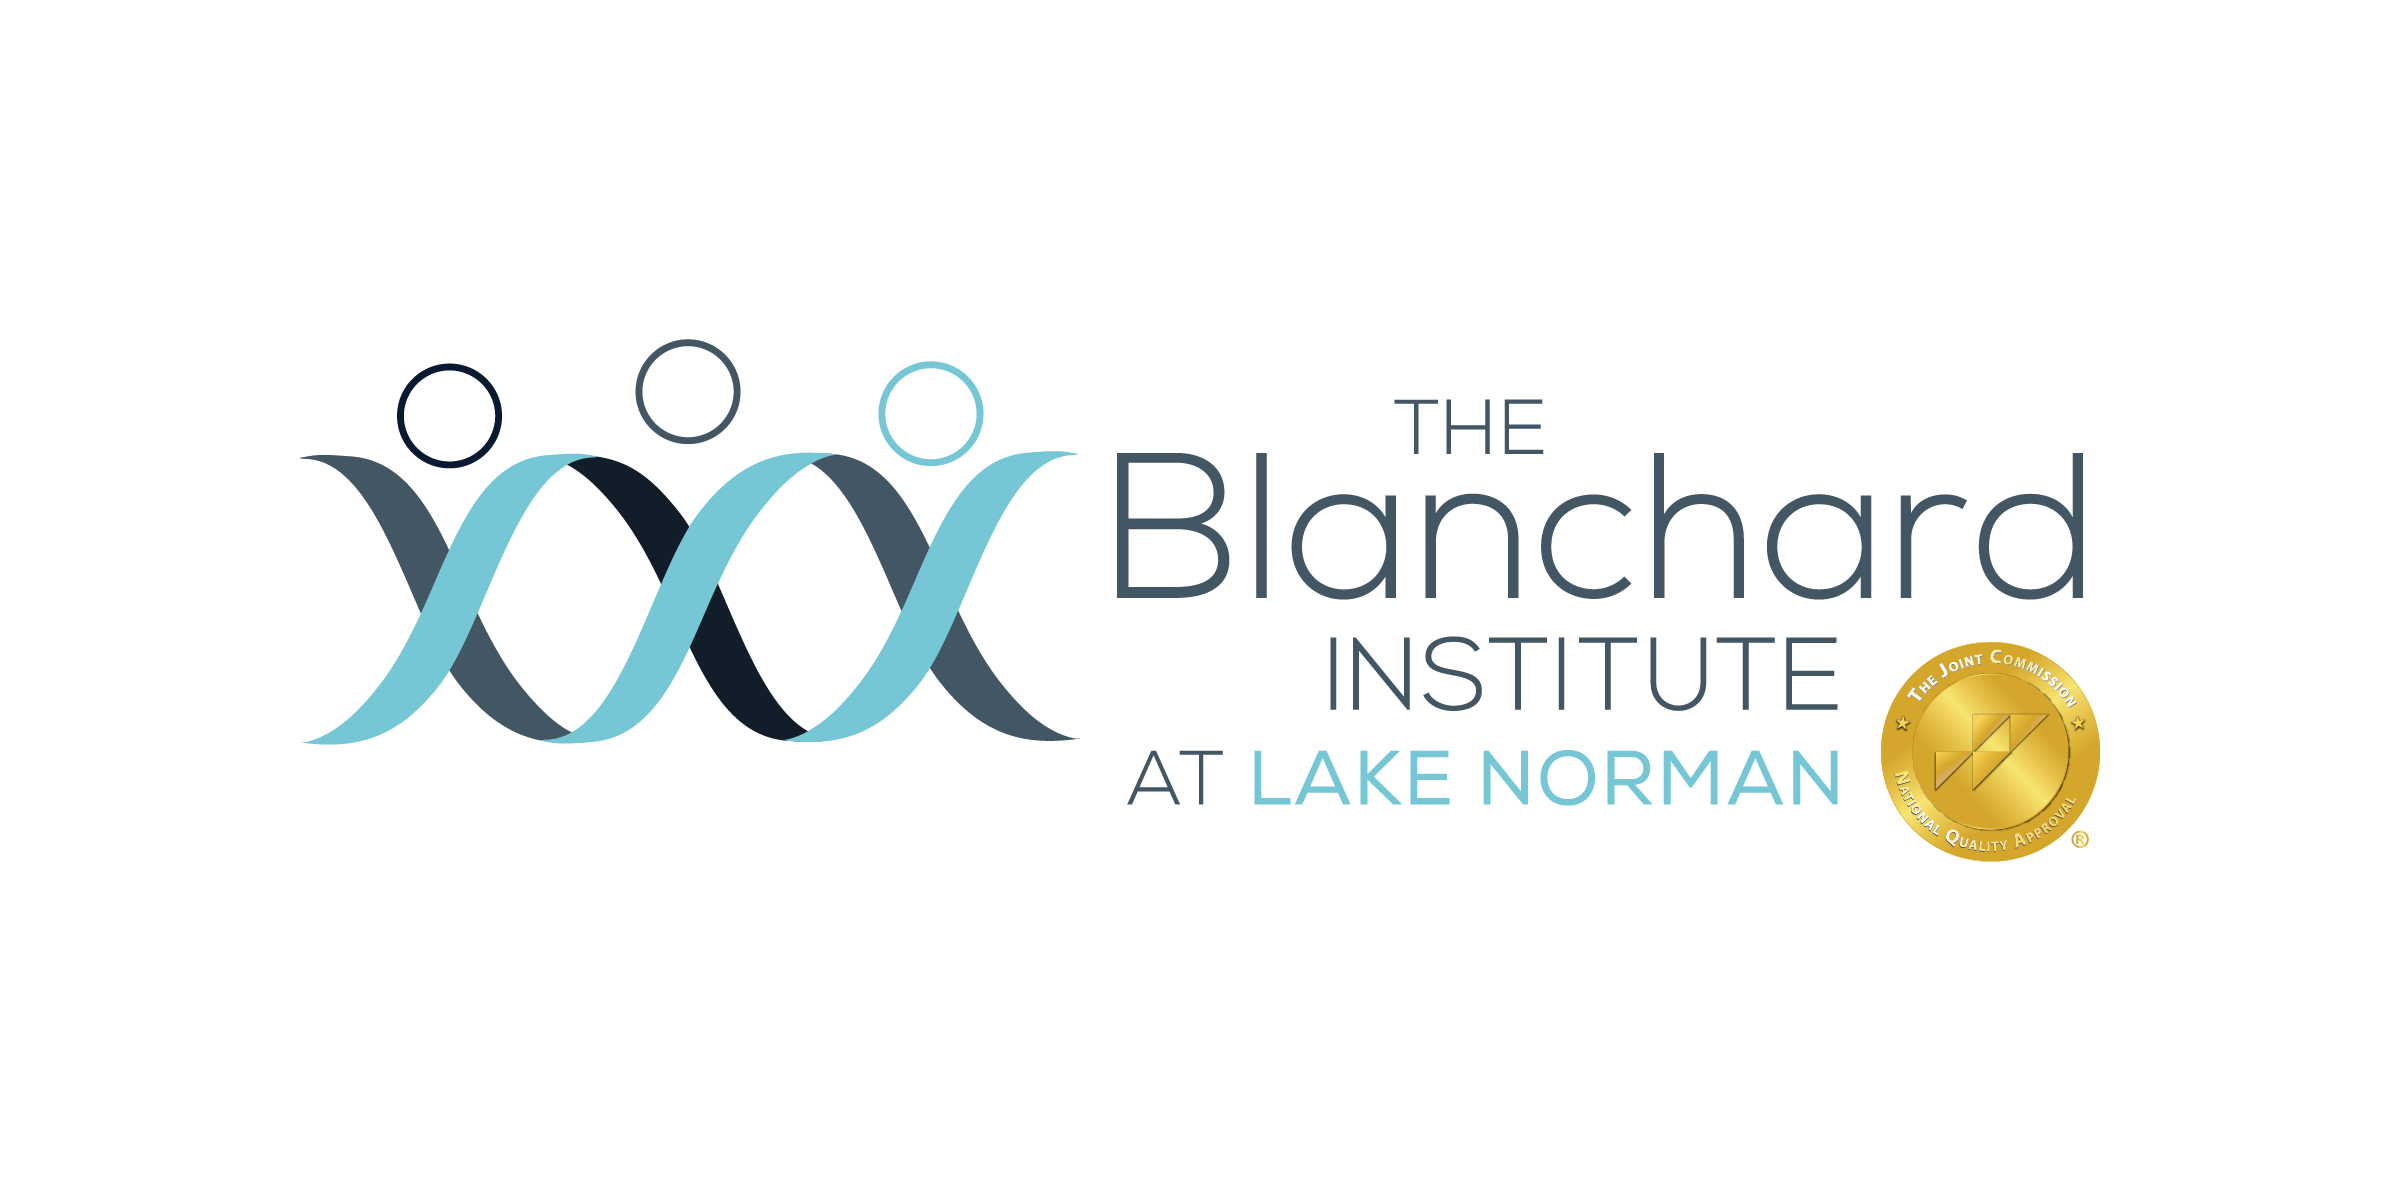 The Blanchard Institute at Lake Norman